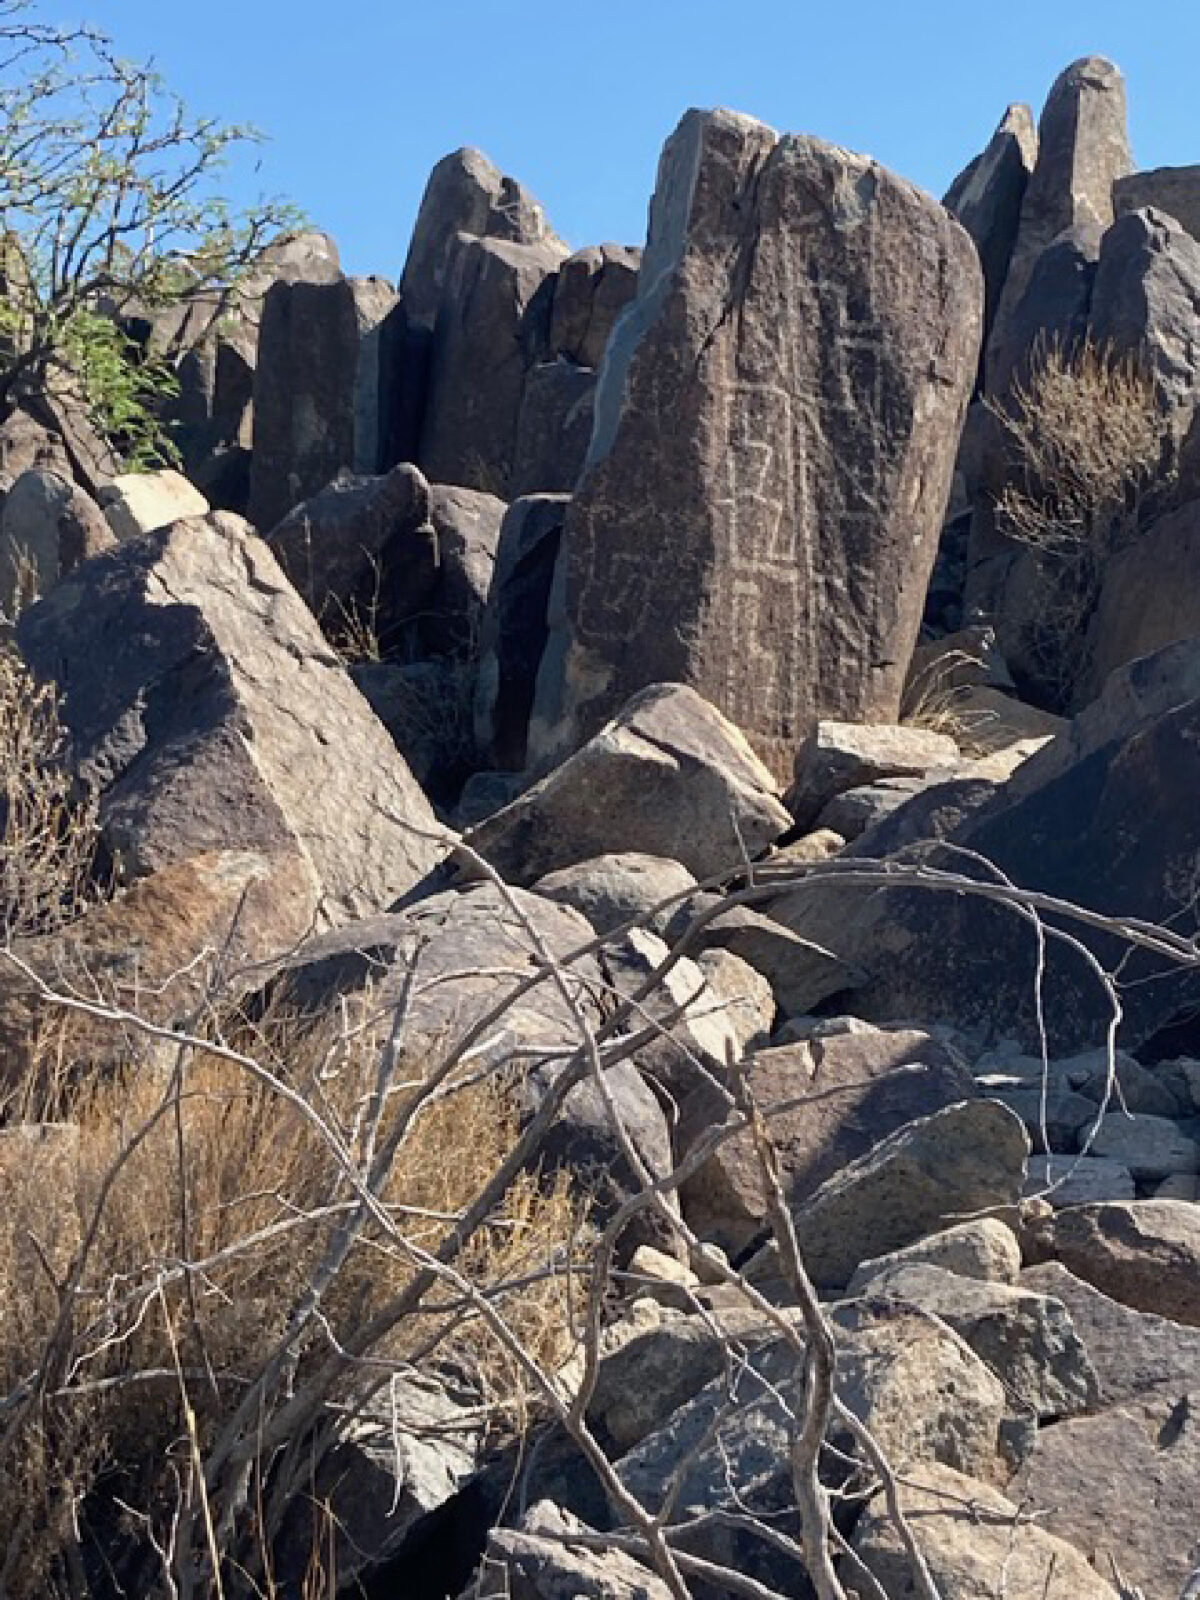 The hike is rough, but finding ancient writings at the Three Rivers Petroglyph Site in Tularosa, N.M., is worth the effort. (Bill Neely)